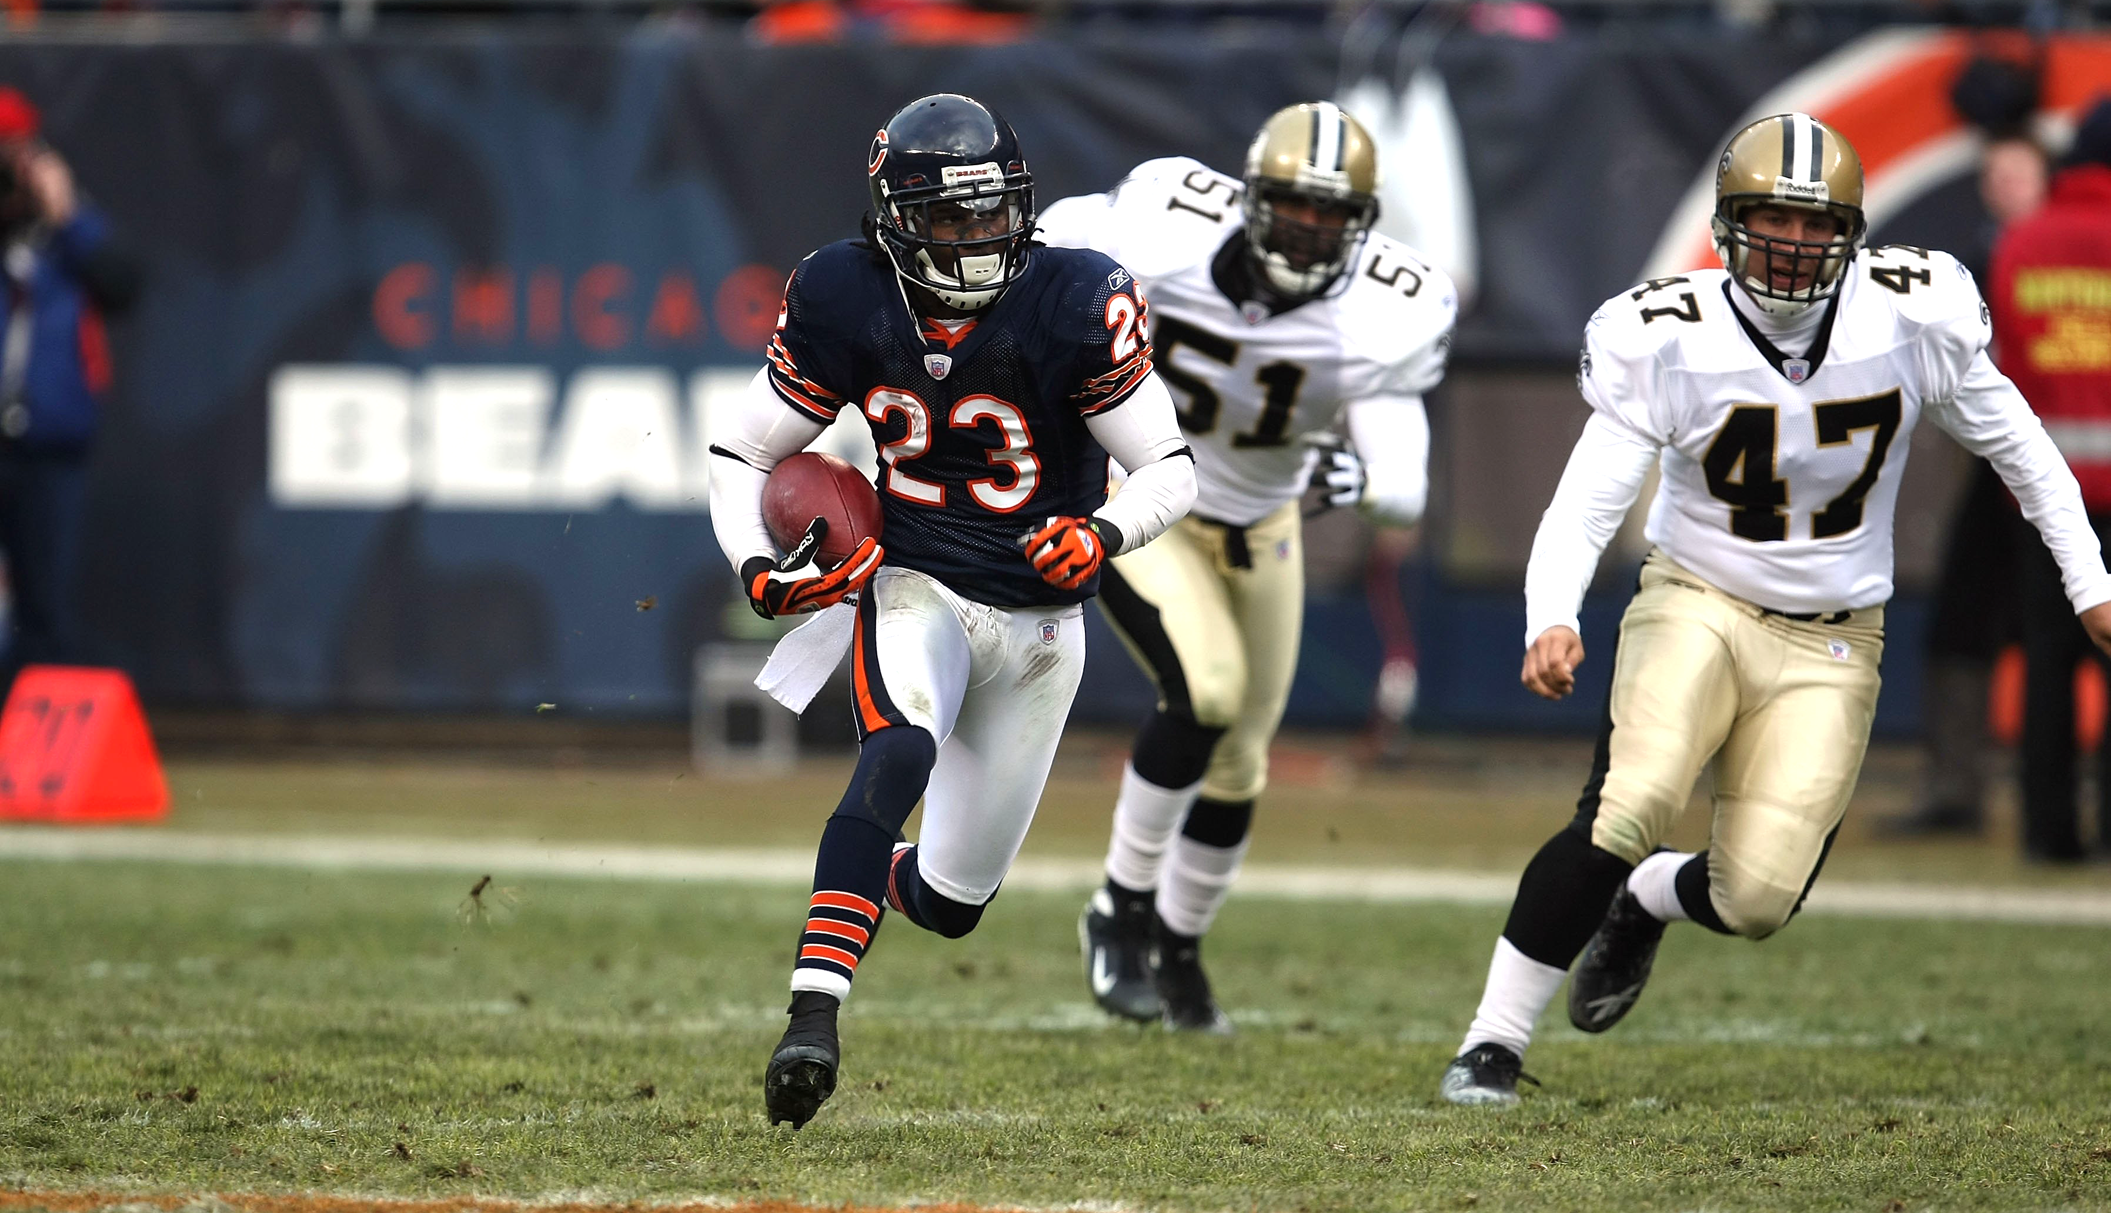 NFL Fans Were Very Angry About Devin Hester Hall Of Fame Snub